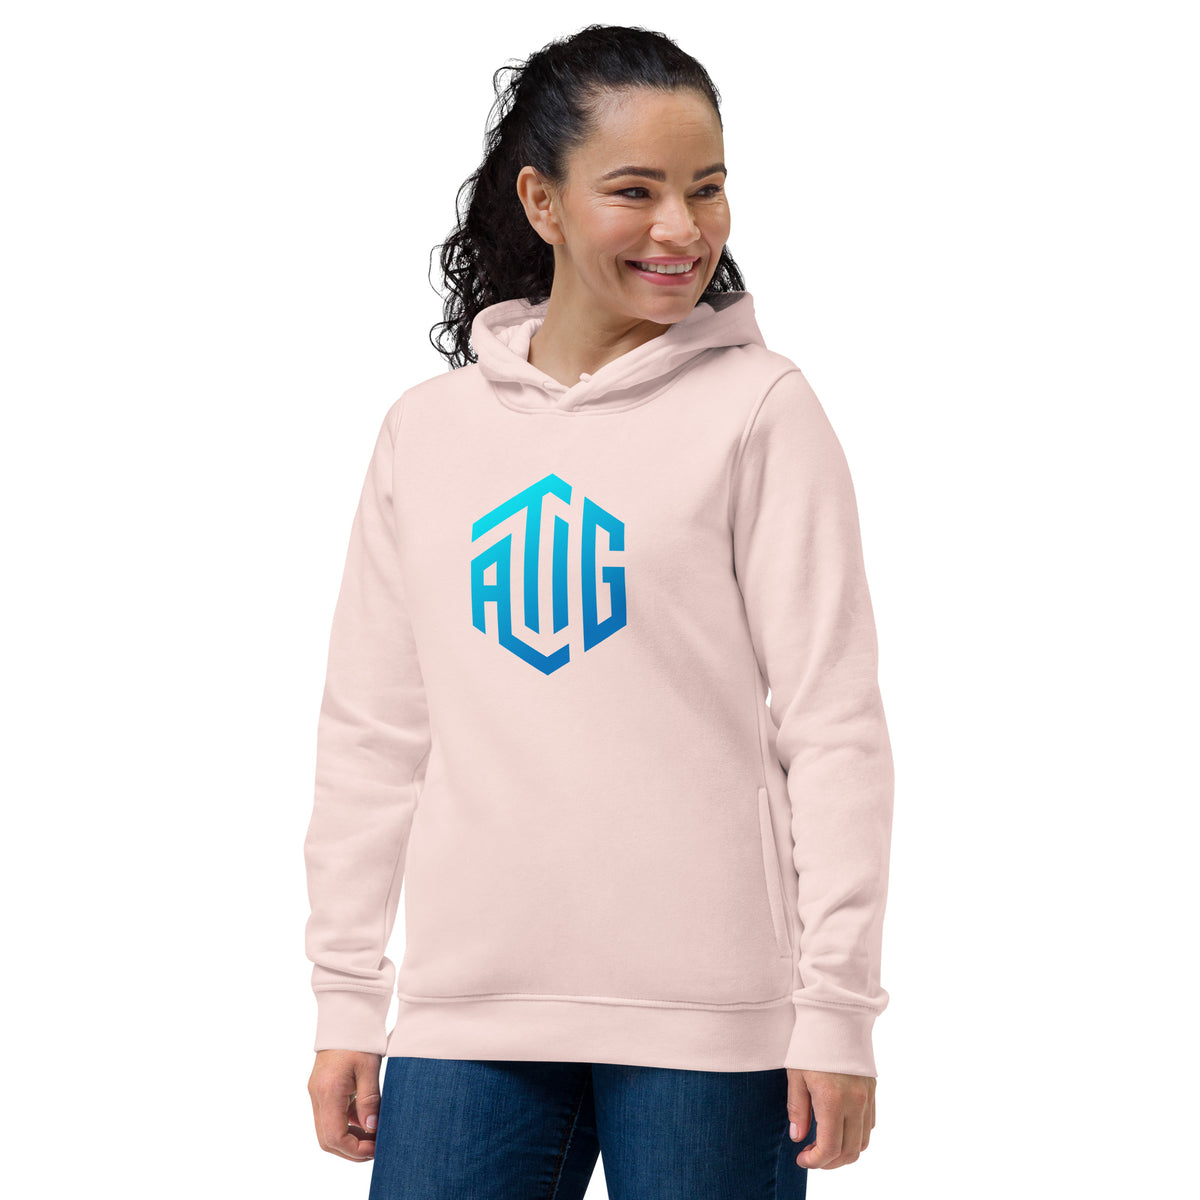 ATIG Women's eco fitted hoodie